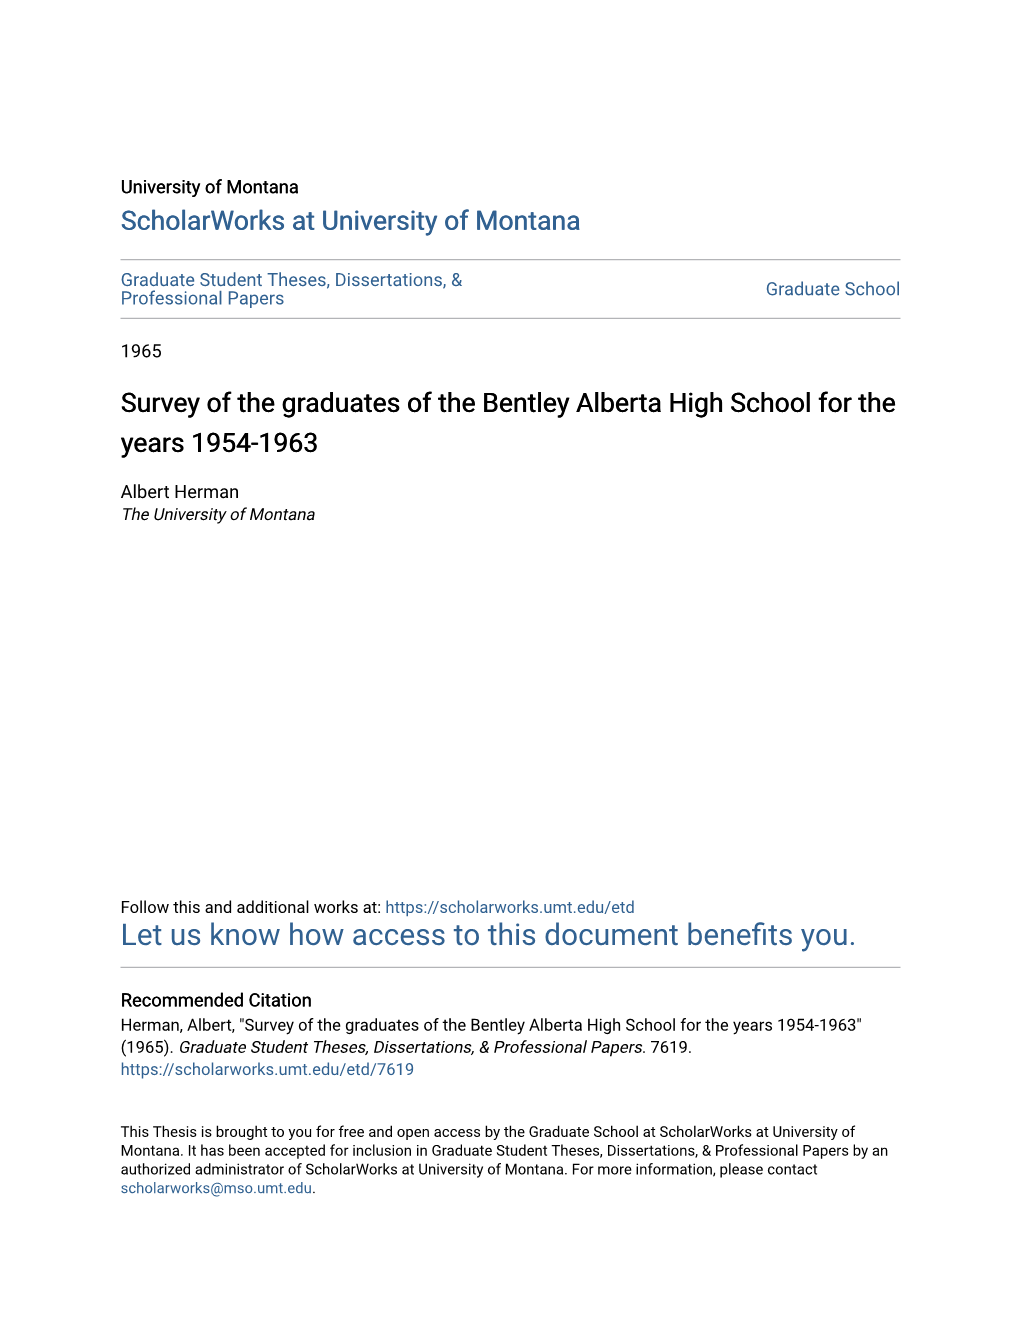 Survey of the Graduates of the Bentley Alberta High School for the Years 1954-1963